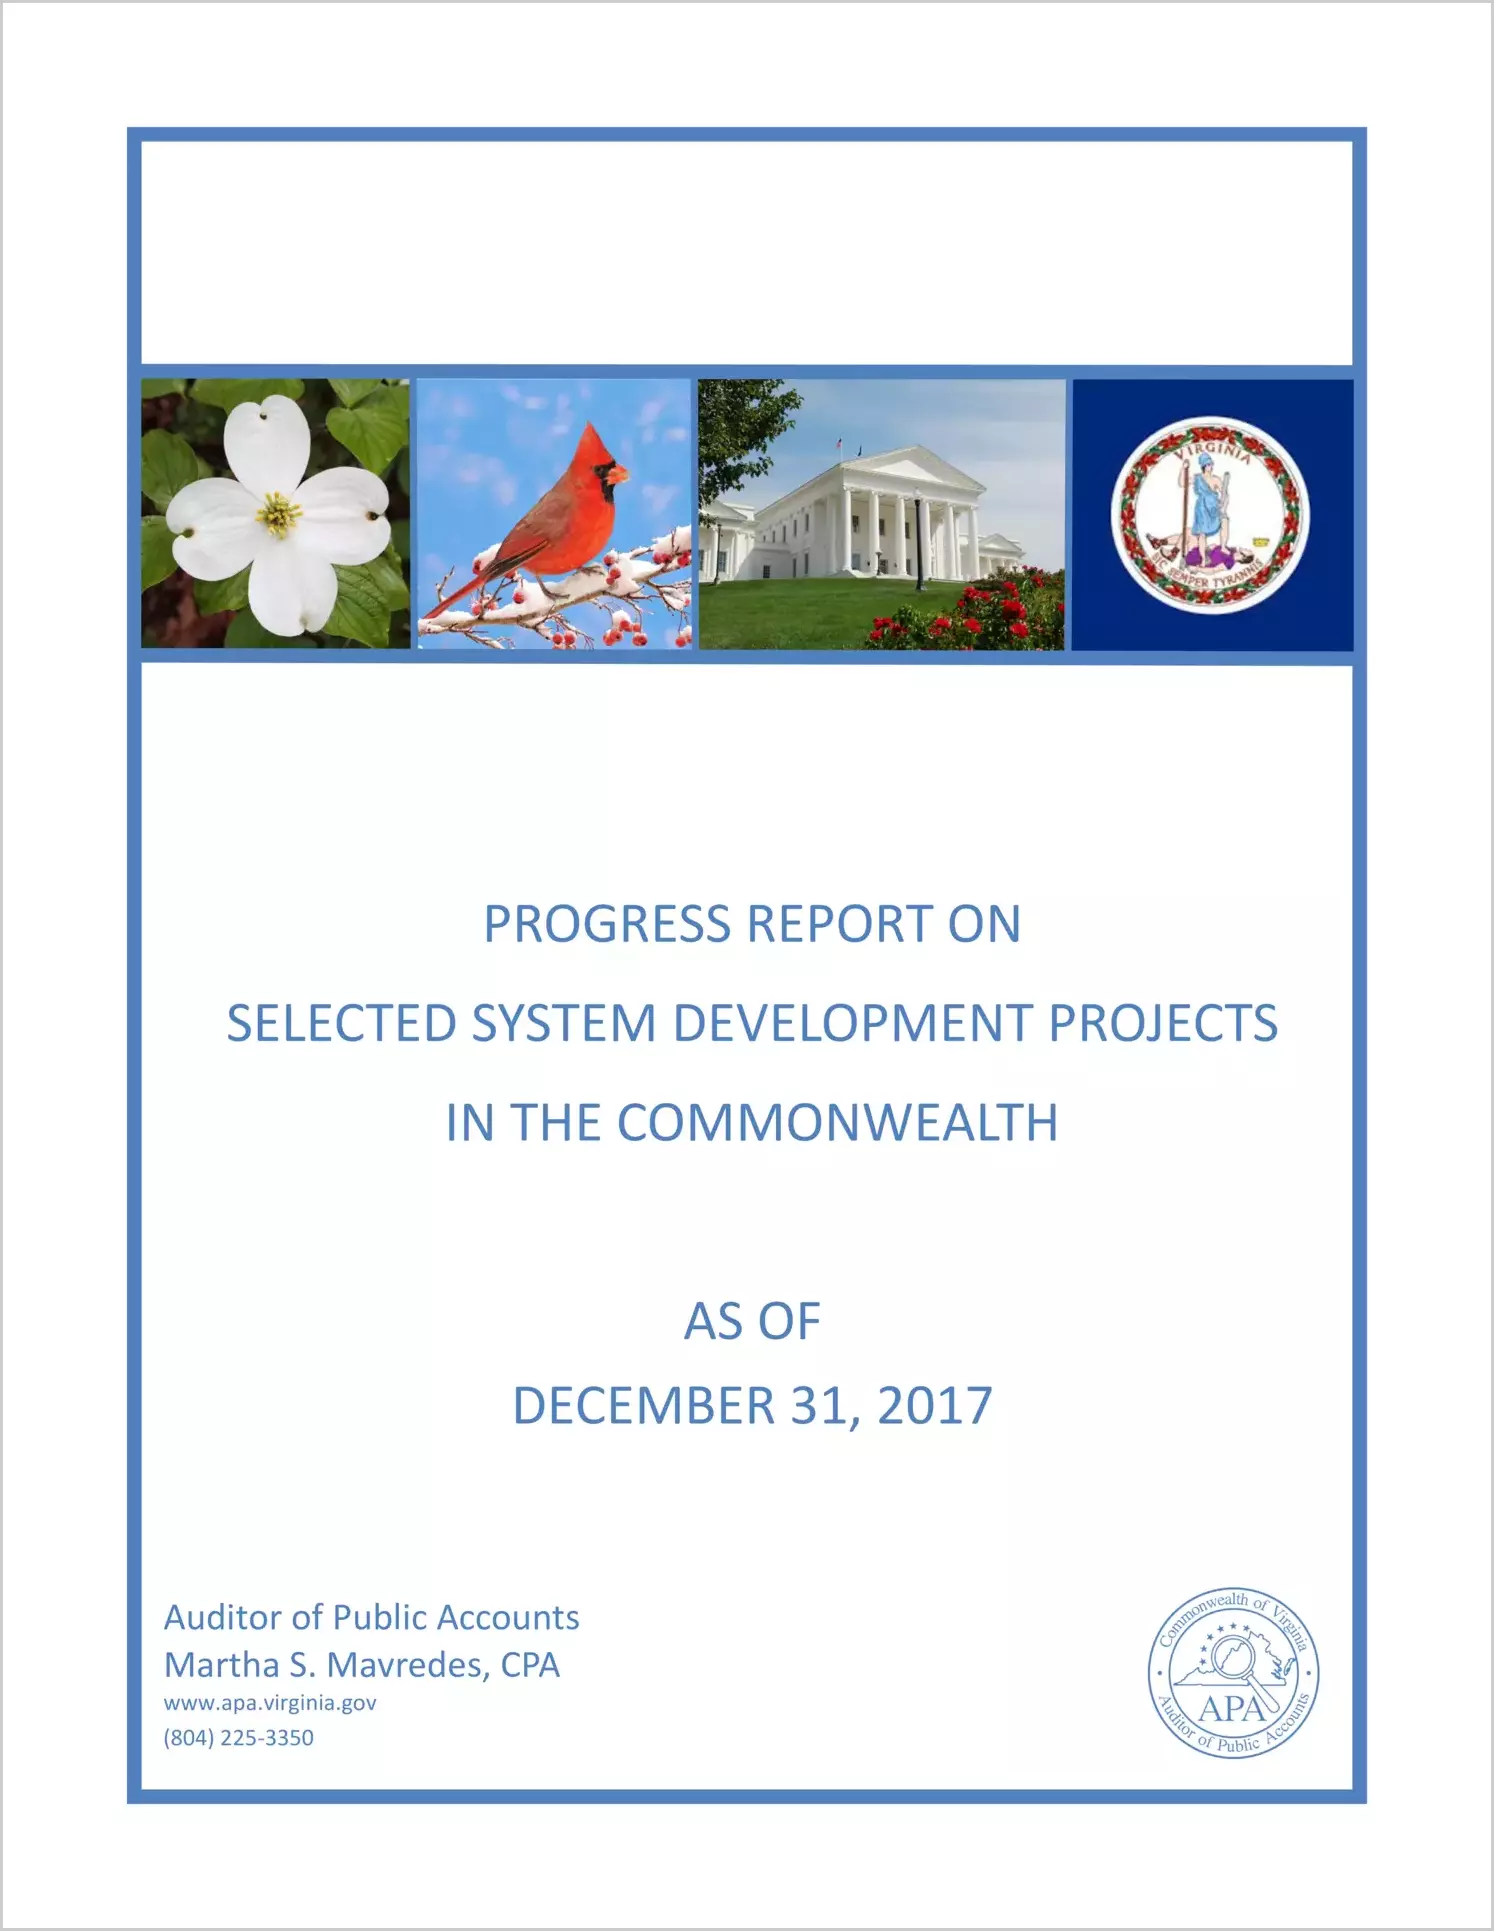 Progress Report on Selected System Development Projects in the Commonwealth as of December 31, 2017